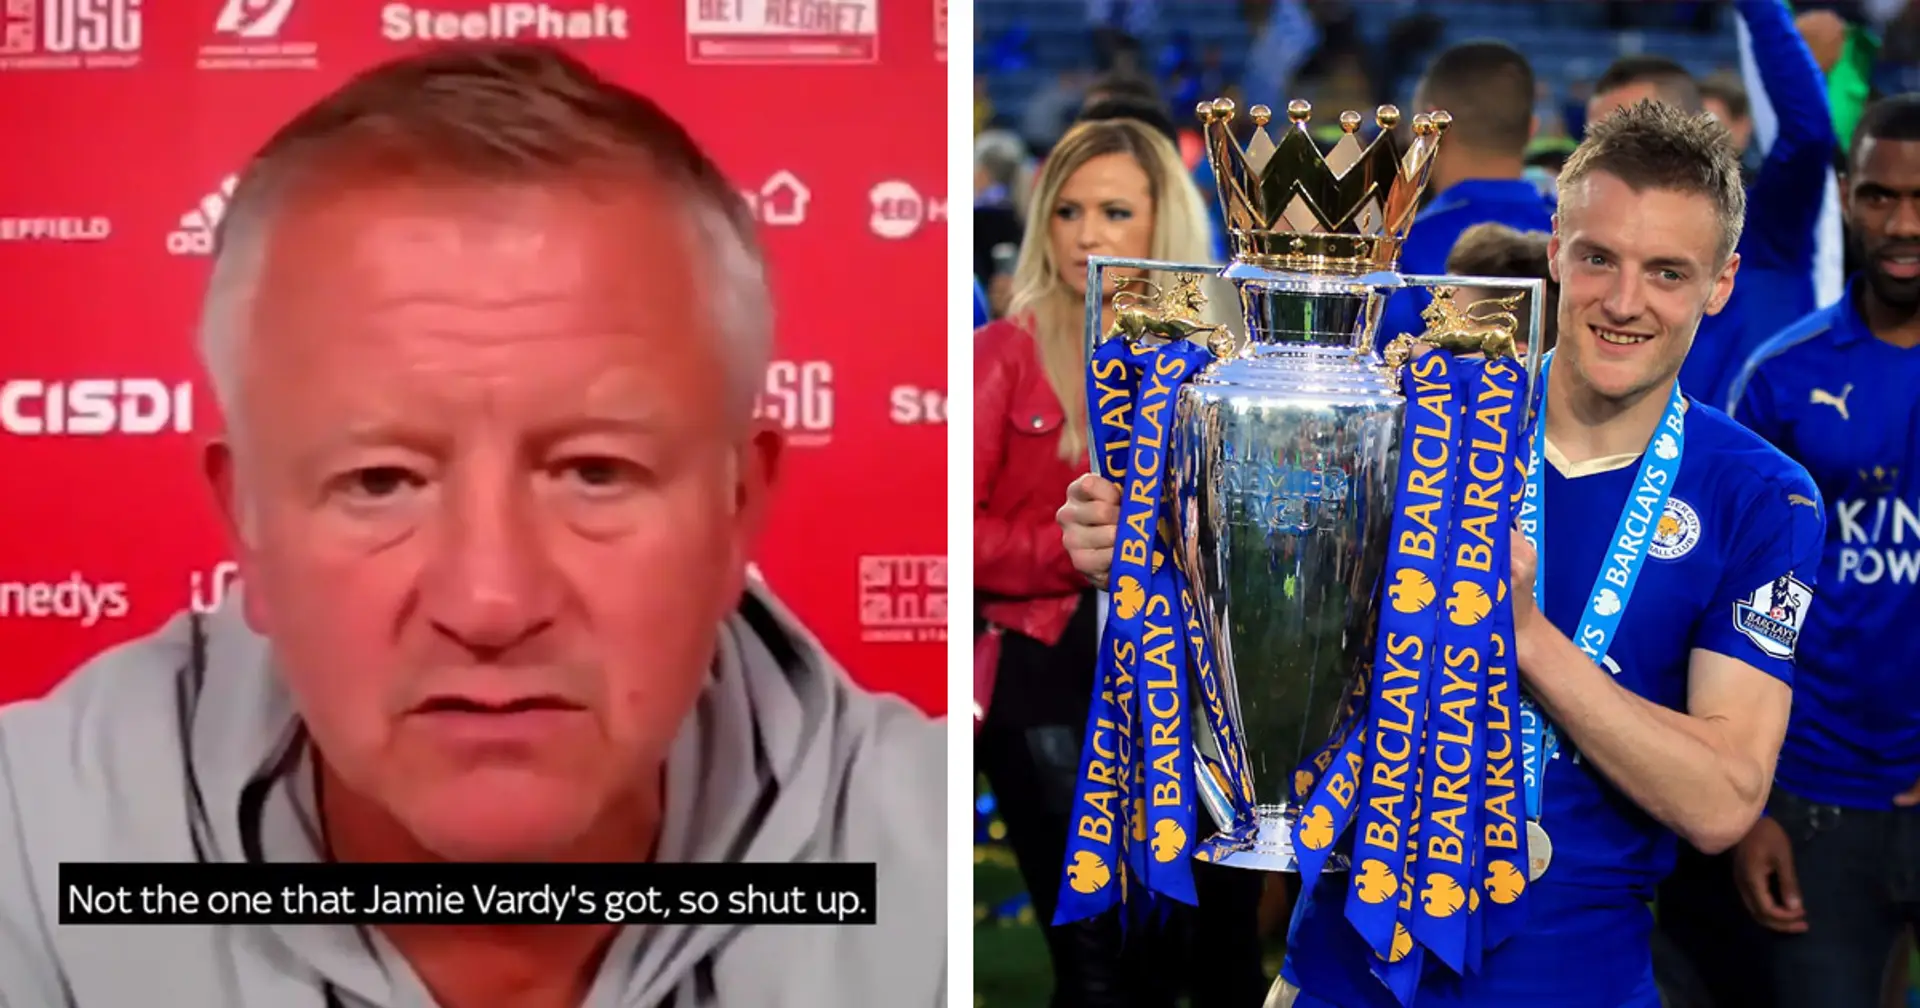 Chris Wilder: 'You deserve to be in the pub with the career you’ve had, not the one Jamie Vardy’s got, so shut up!'